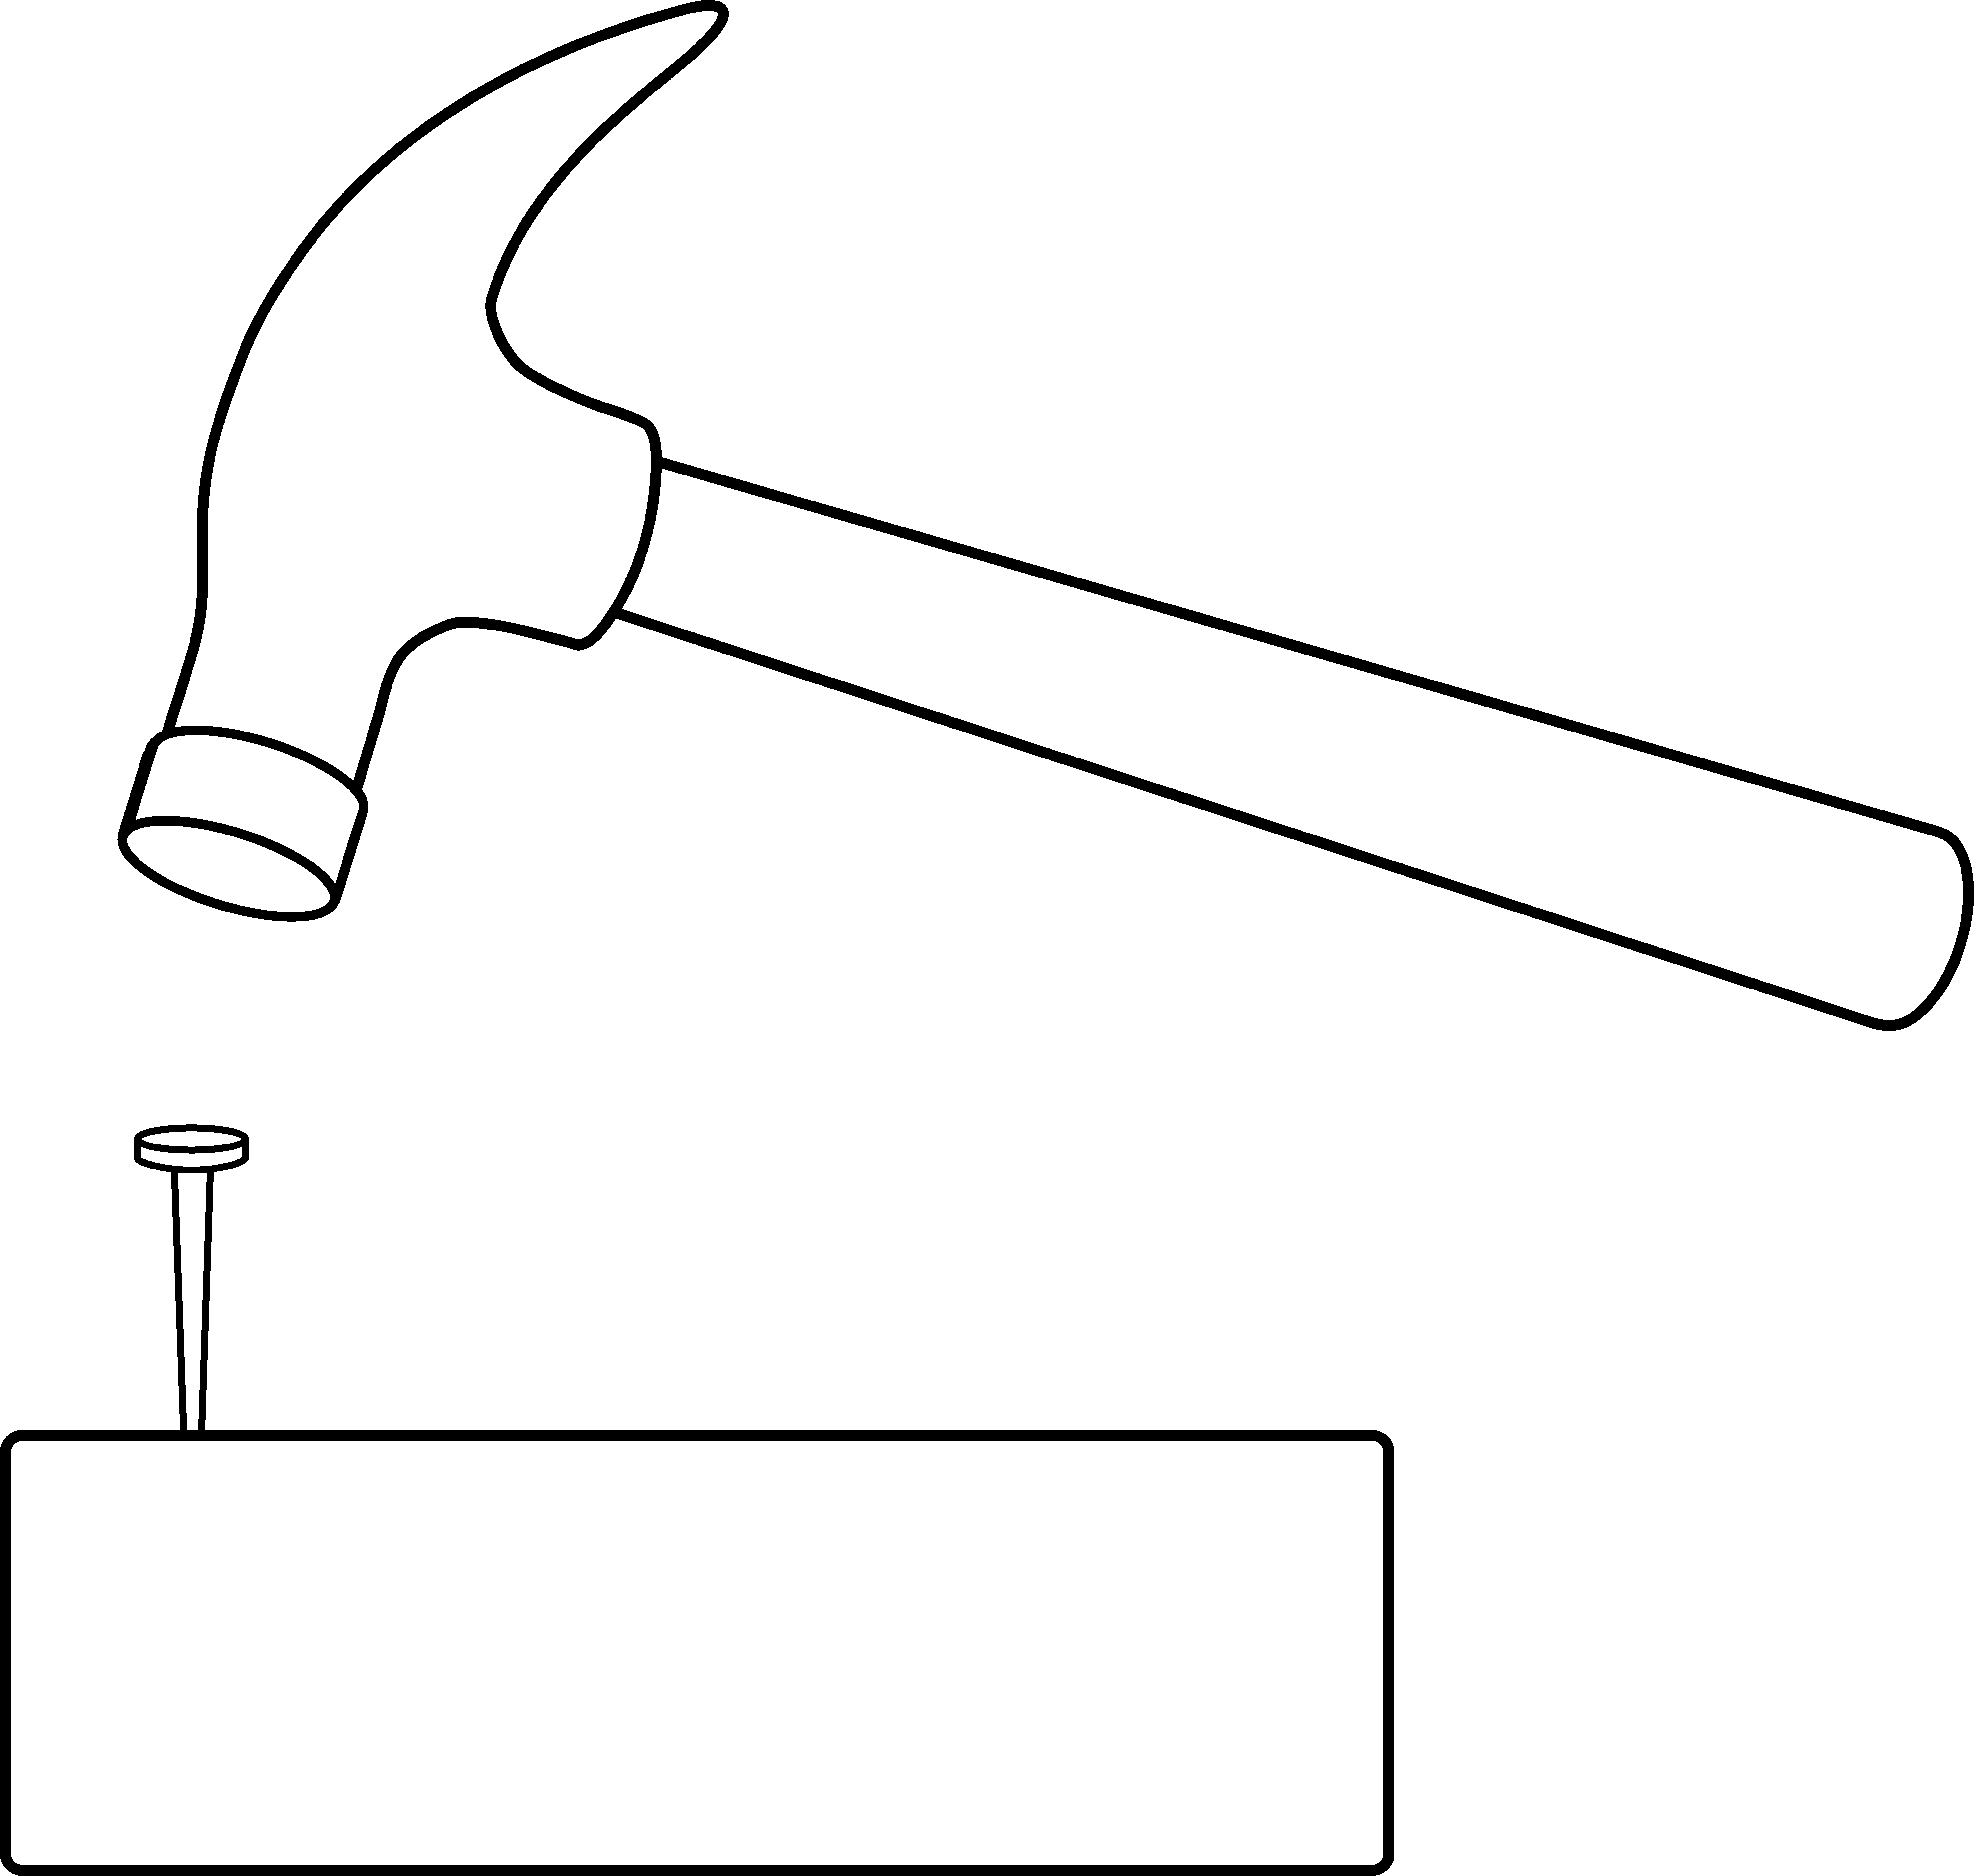 Hammer and Nail Outline - Free Clip Art